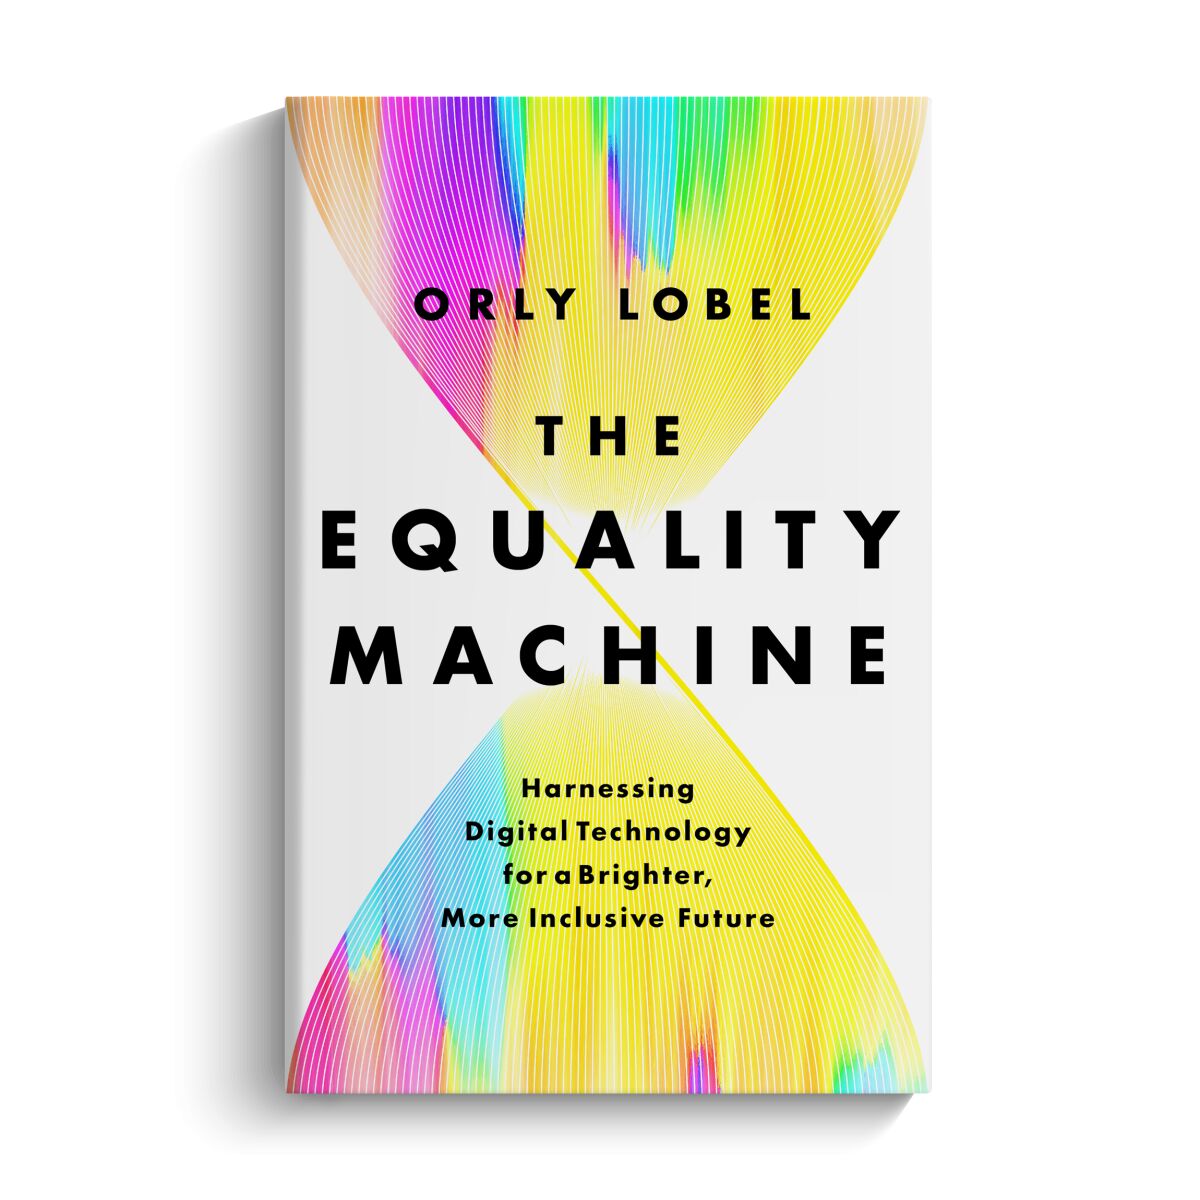 "The Equality Machine" by La Jolla resident Orly Lobel will be published Tuesday, Oct. 18.